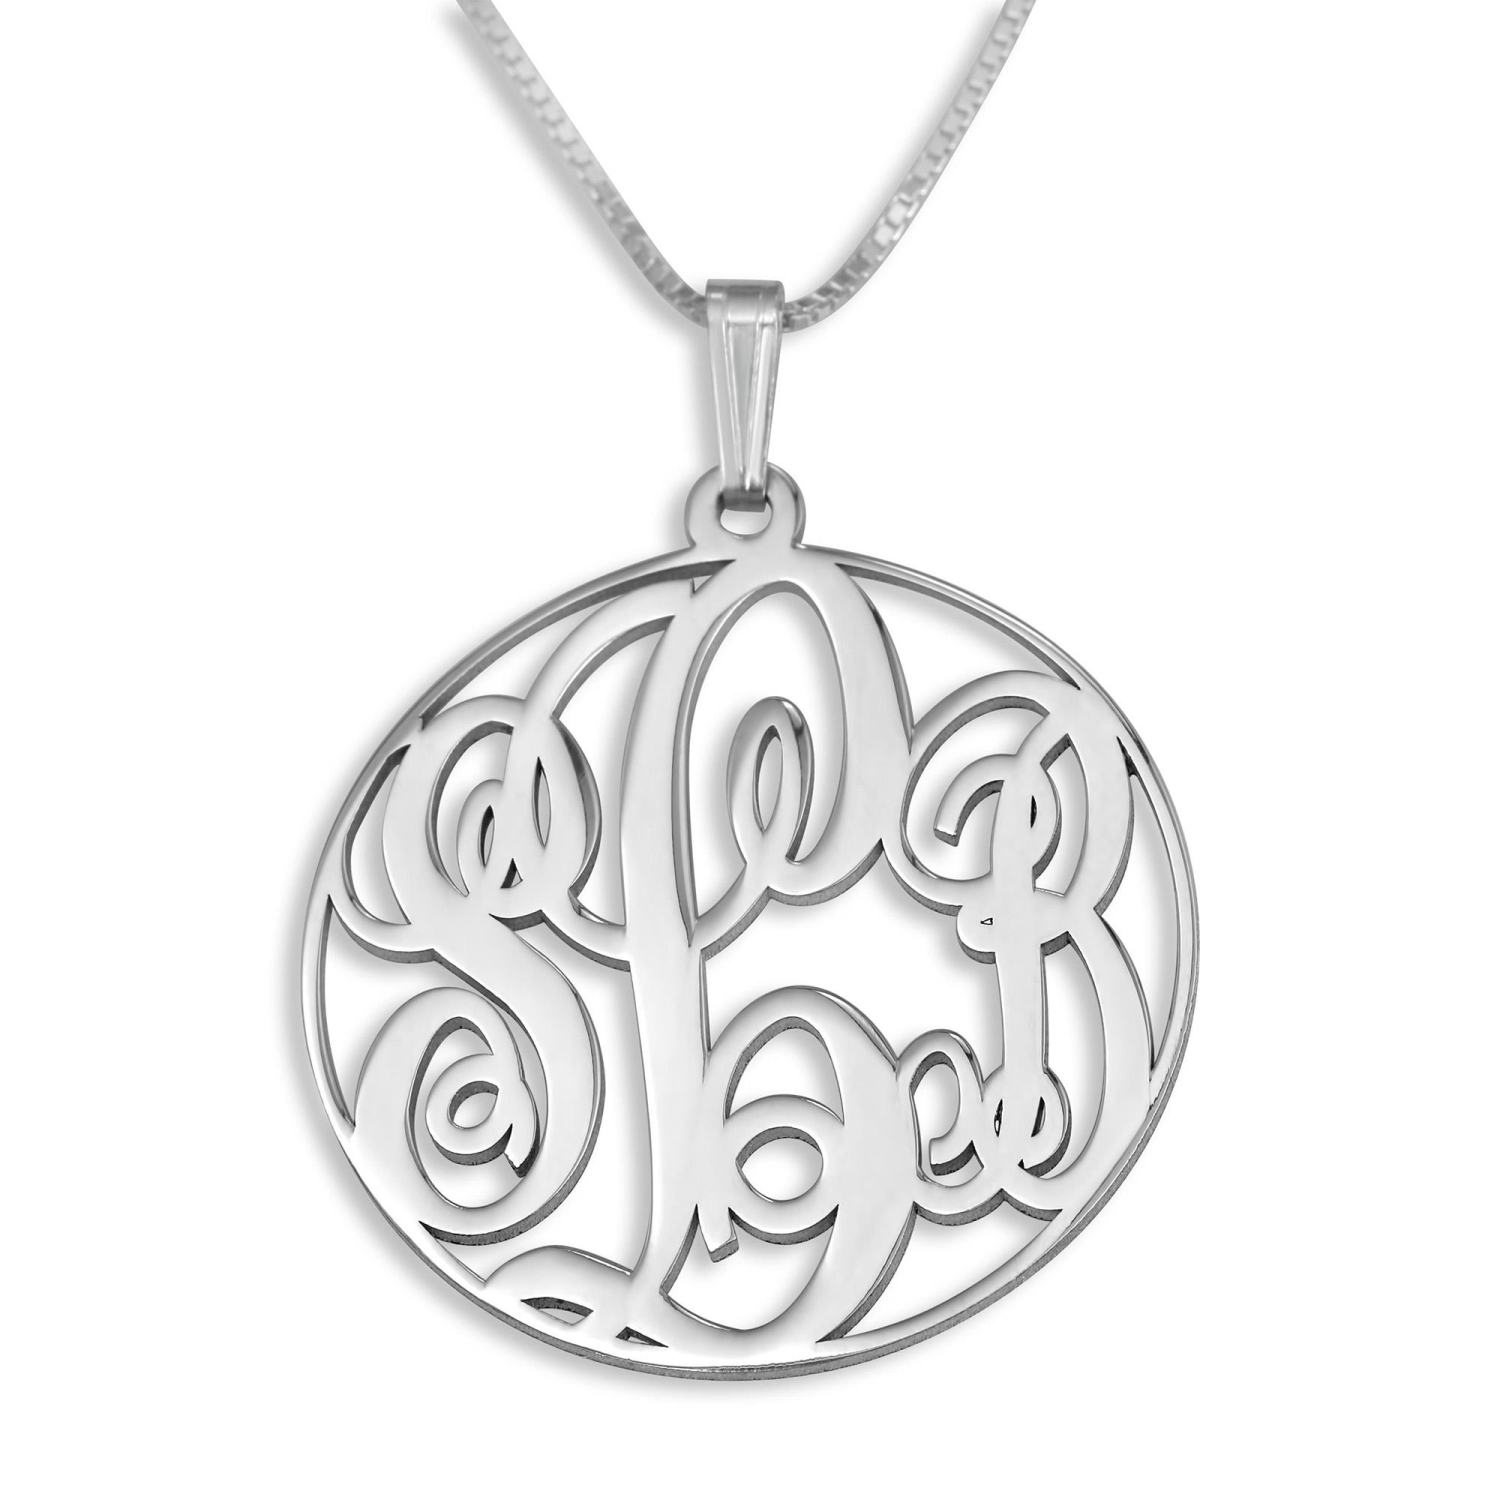 Silver Round Monogram Personalized Name Necklace - English - 2